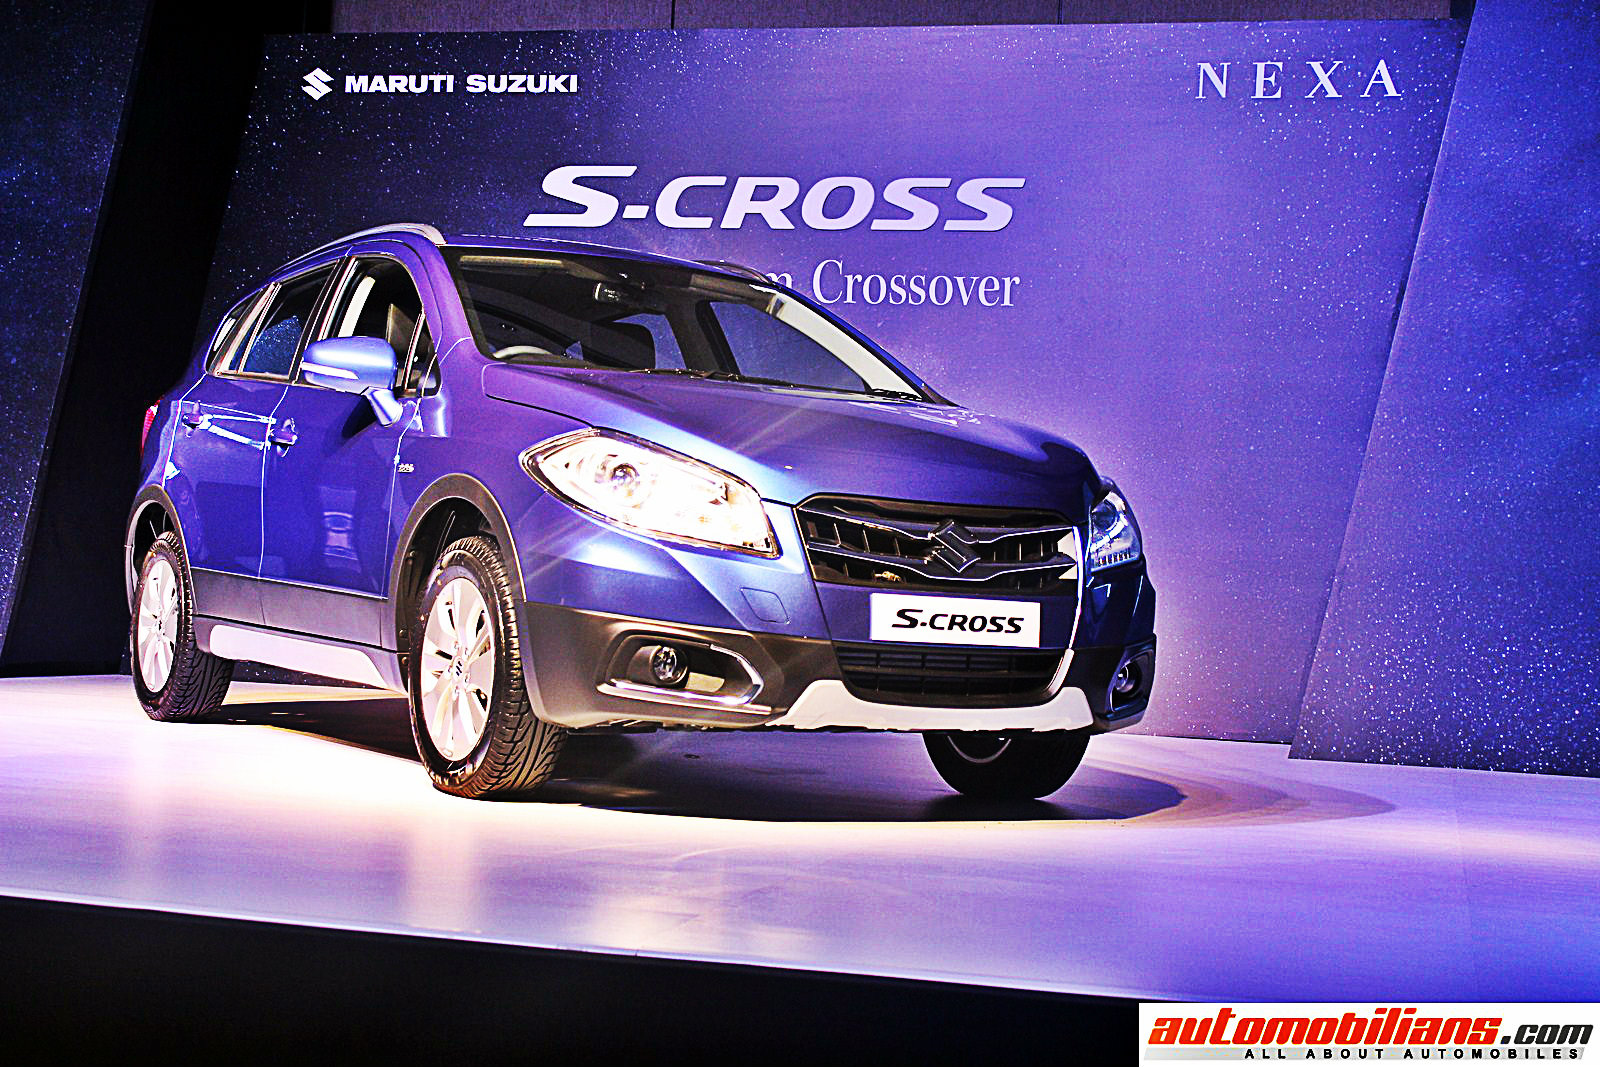 Maruti Suzuki S-Cross Launched In India At Rs. 8.59 Lakhs (Ex-Showroom, Pune)